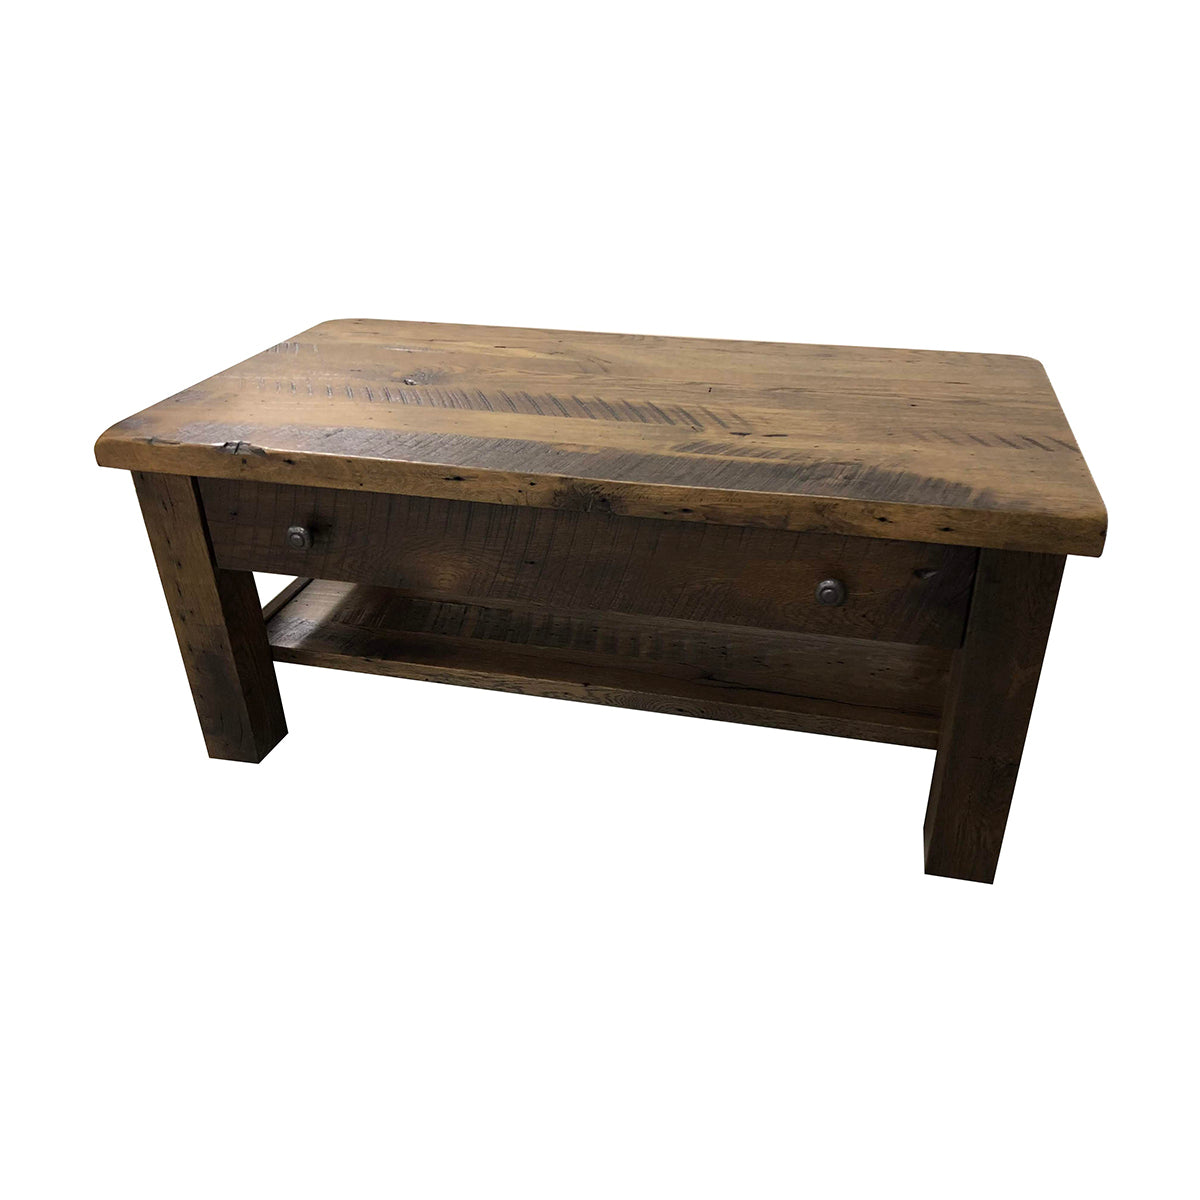 Reclaimed wood coffee table with drawers, murky finish